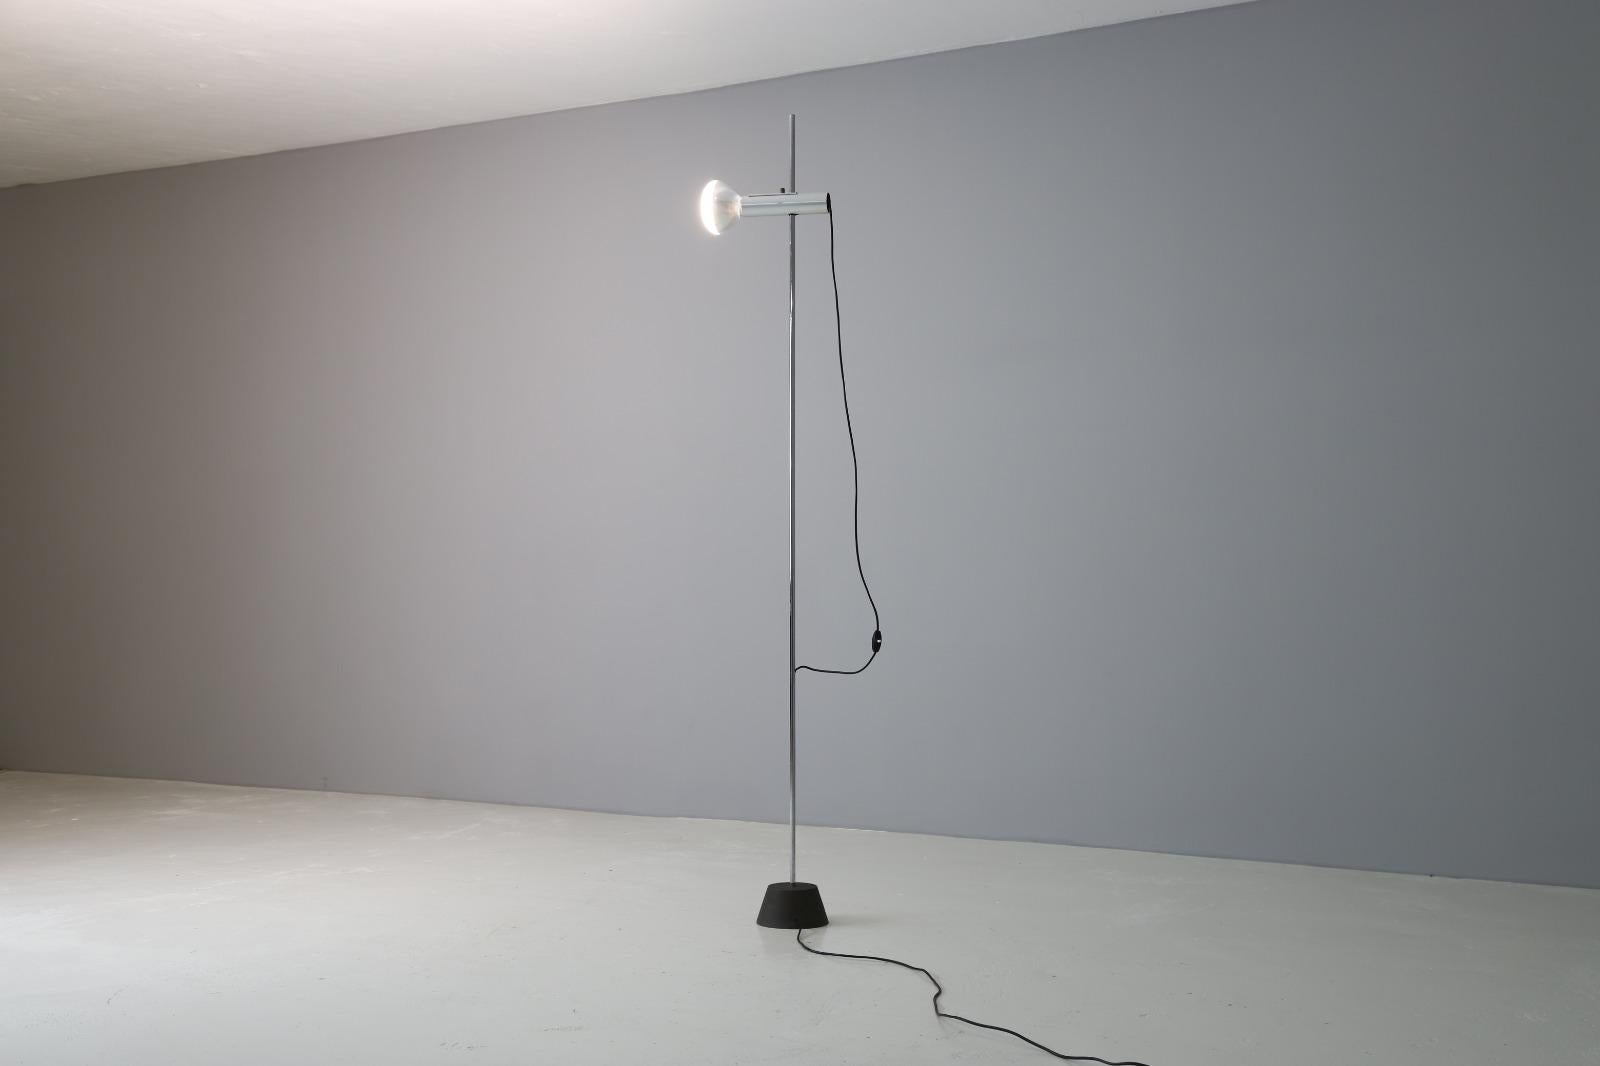 Minimalistic '1074' floor lamp designed by the famous Italian designer Gino Sarfatti. Produced by Arteluce in the late 1950s. The floor lamp can be used as a uplighter or positioned in any direction or height because of the ingeniously designed bulb